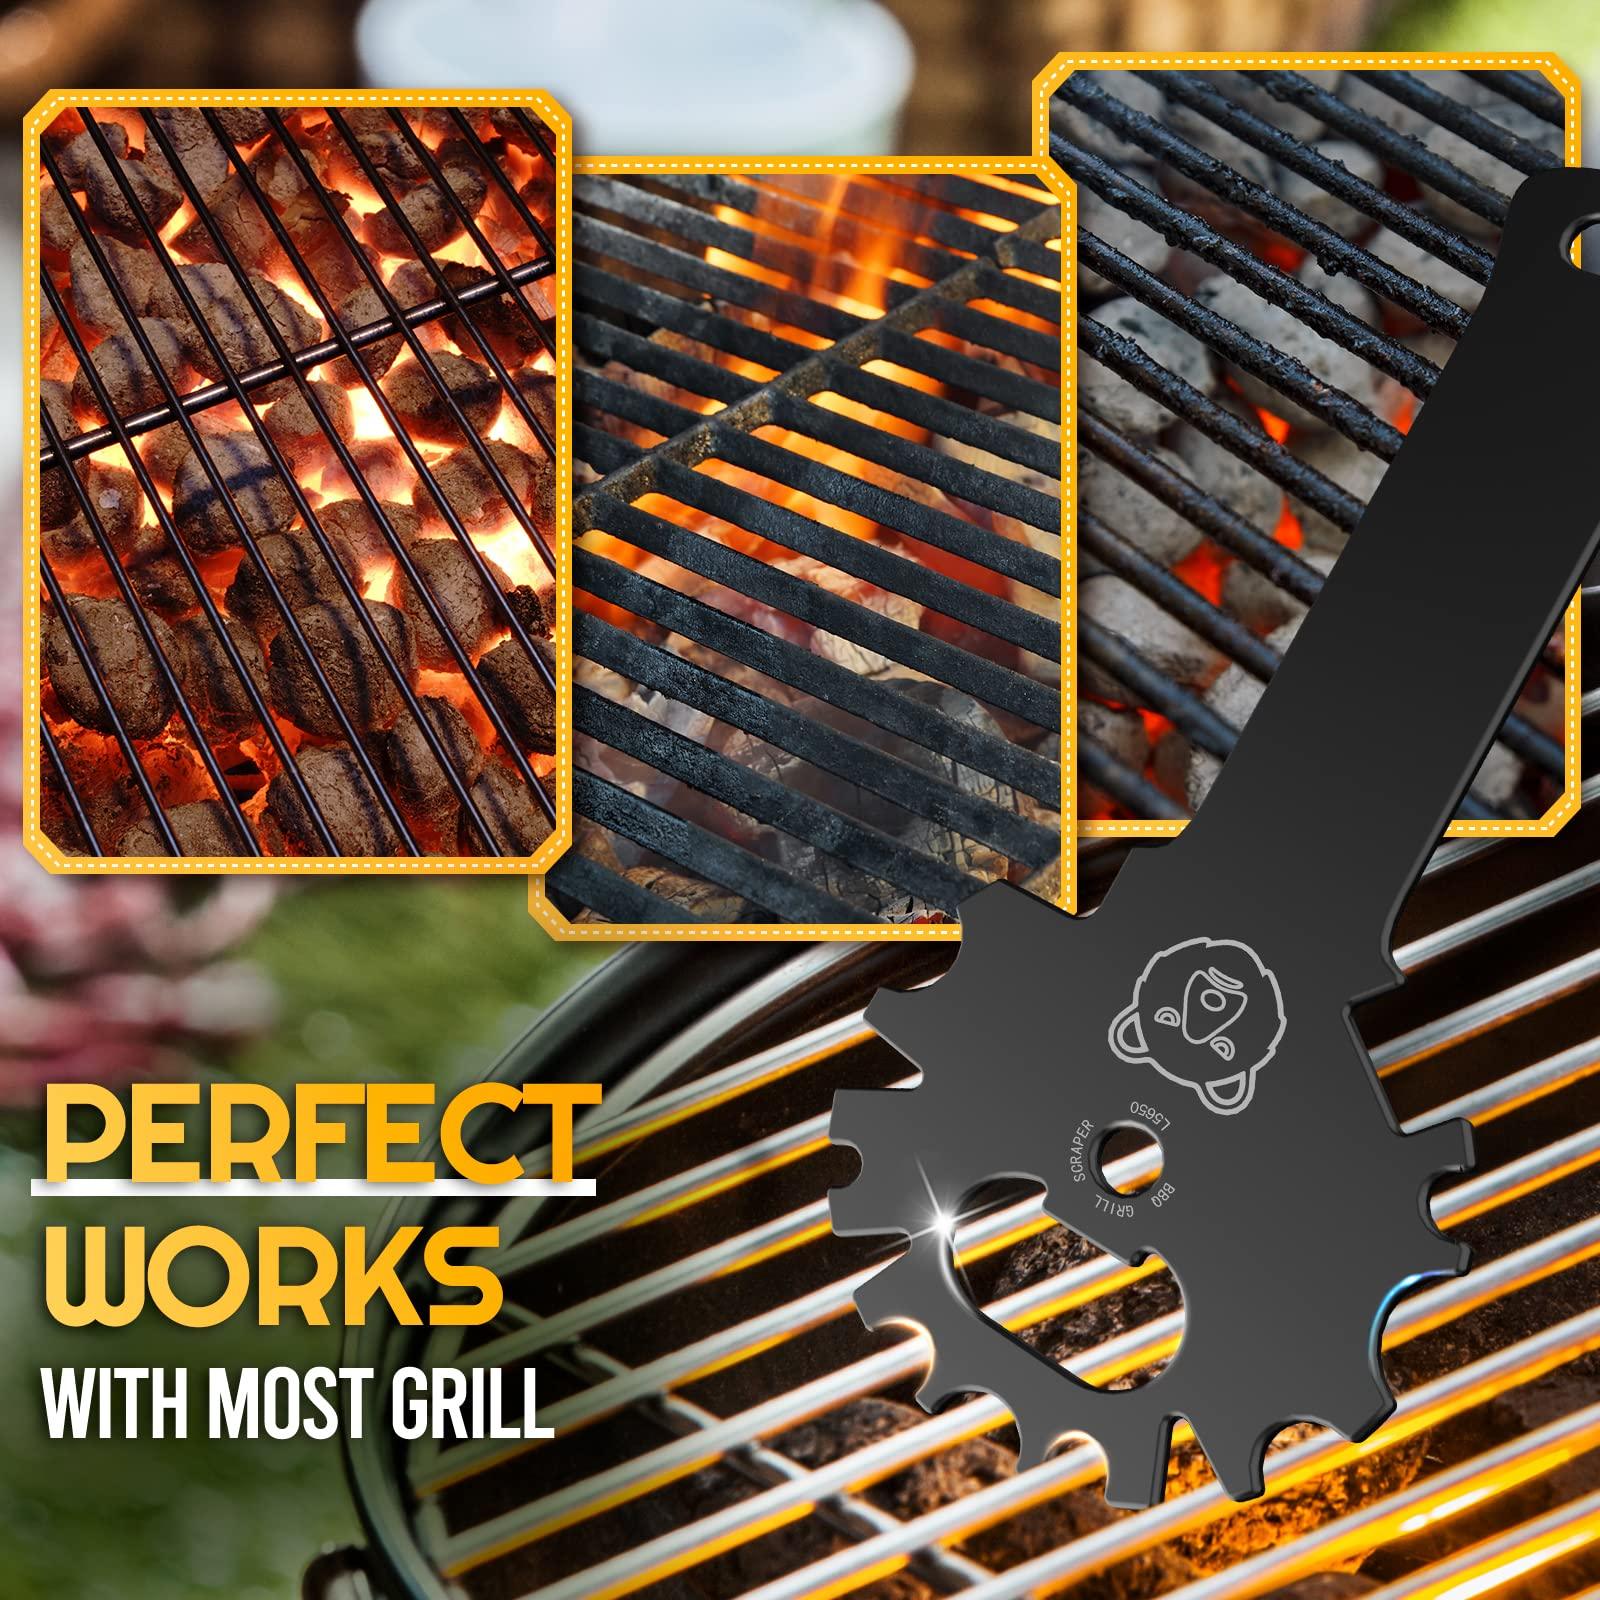 Grilling Gifts for Men BBQ Grill Scraper - Christmas Stocking Stuffers for Men Women Grill Accessories Cleaner Scraper Cool Stuff Gadgets for Teens Adults Husband Dad Birthday Gifts Kitchen Gadgets - CookCave